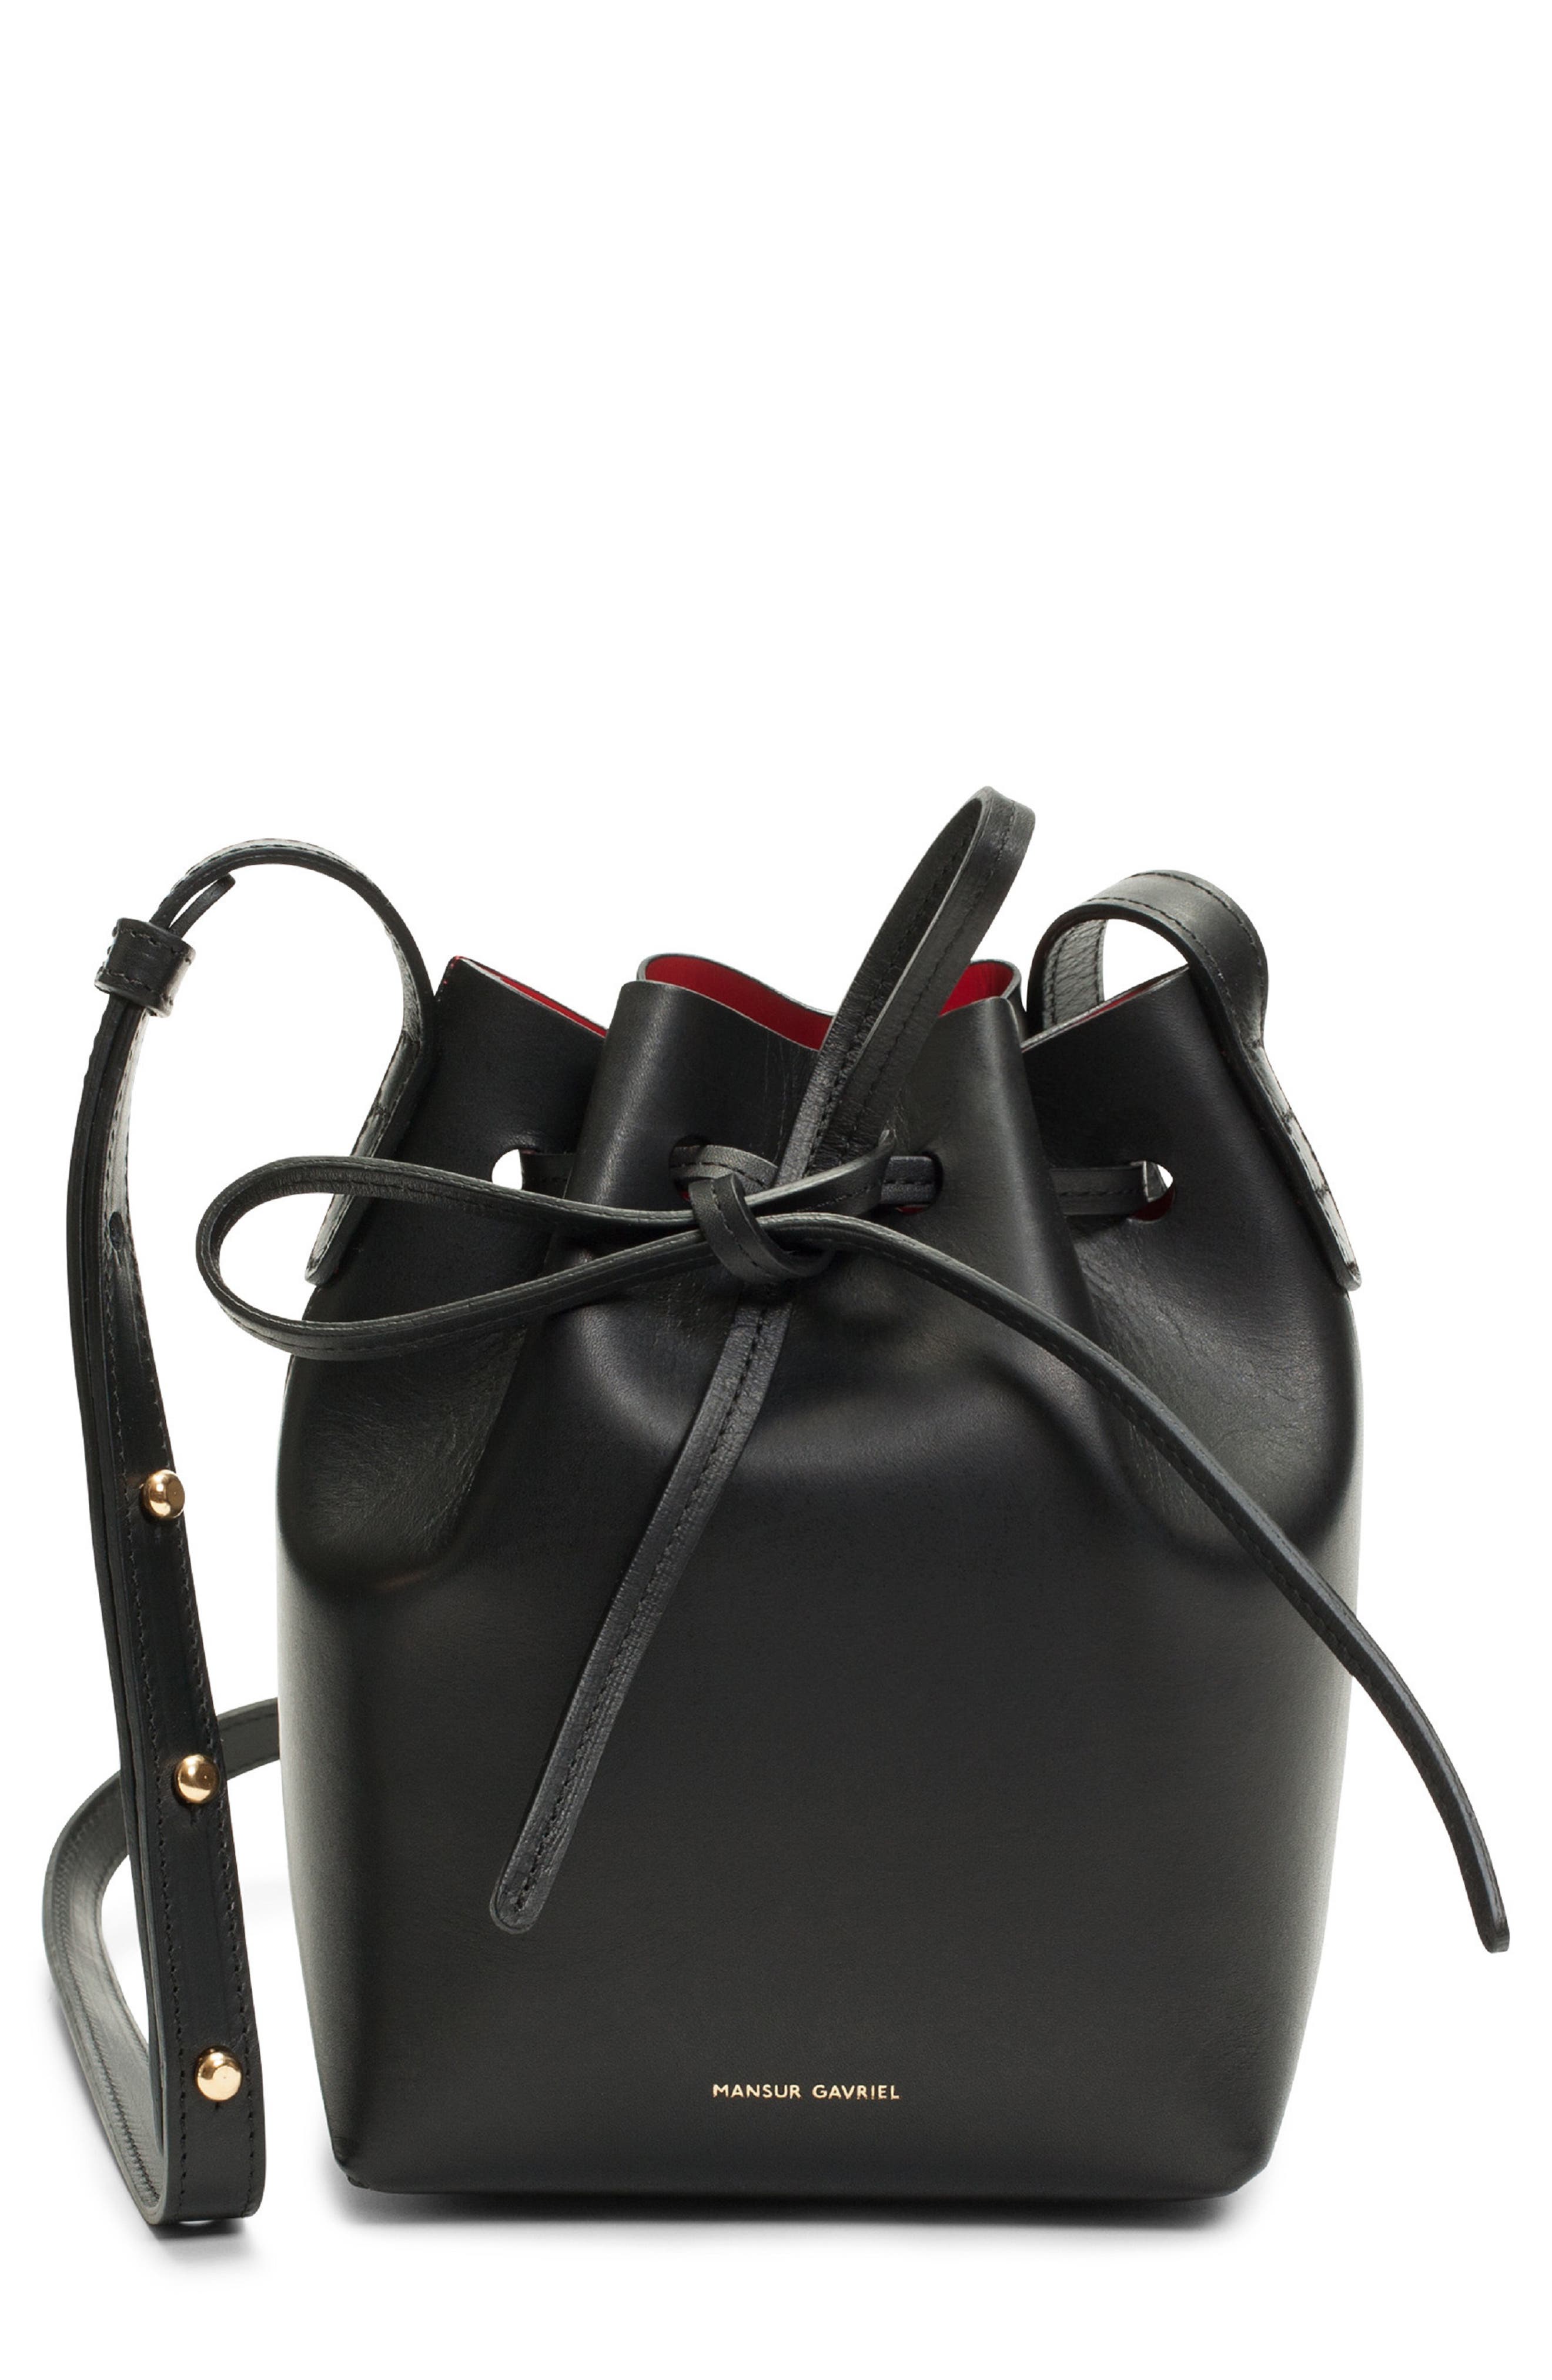 small leather bucket bag